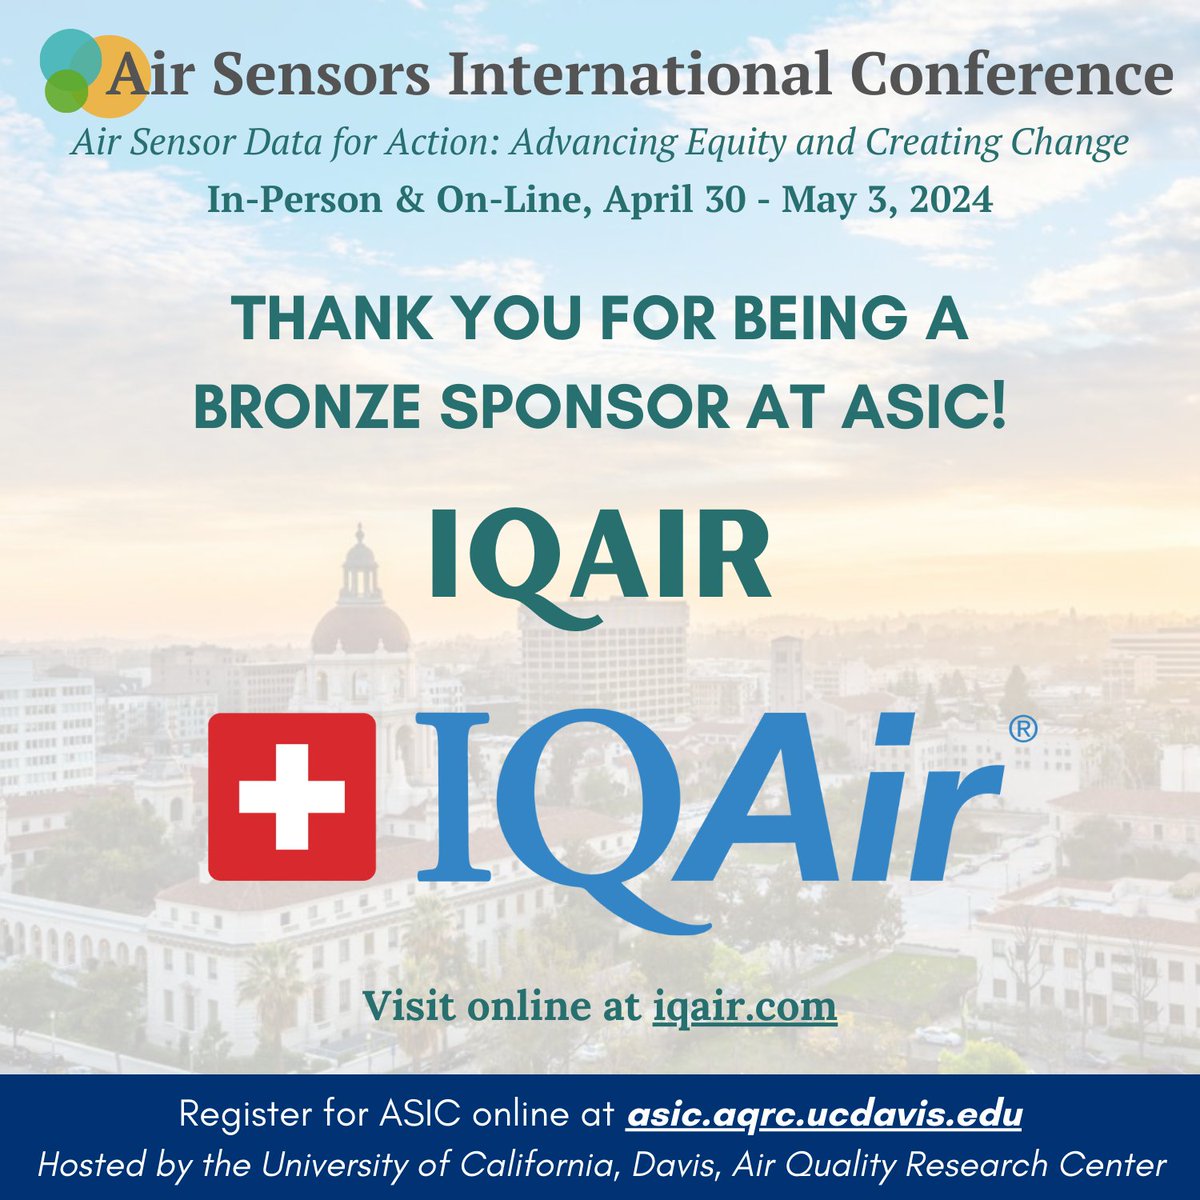 Thank you again to IQAir for being a bronze sponsor at ASIC California 2024! Learn more about IQAir at iqair.com @IQAir #ASIC2024 #airquality #airsensors #lowcostsensors